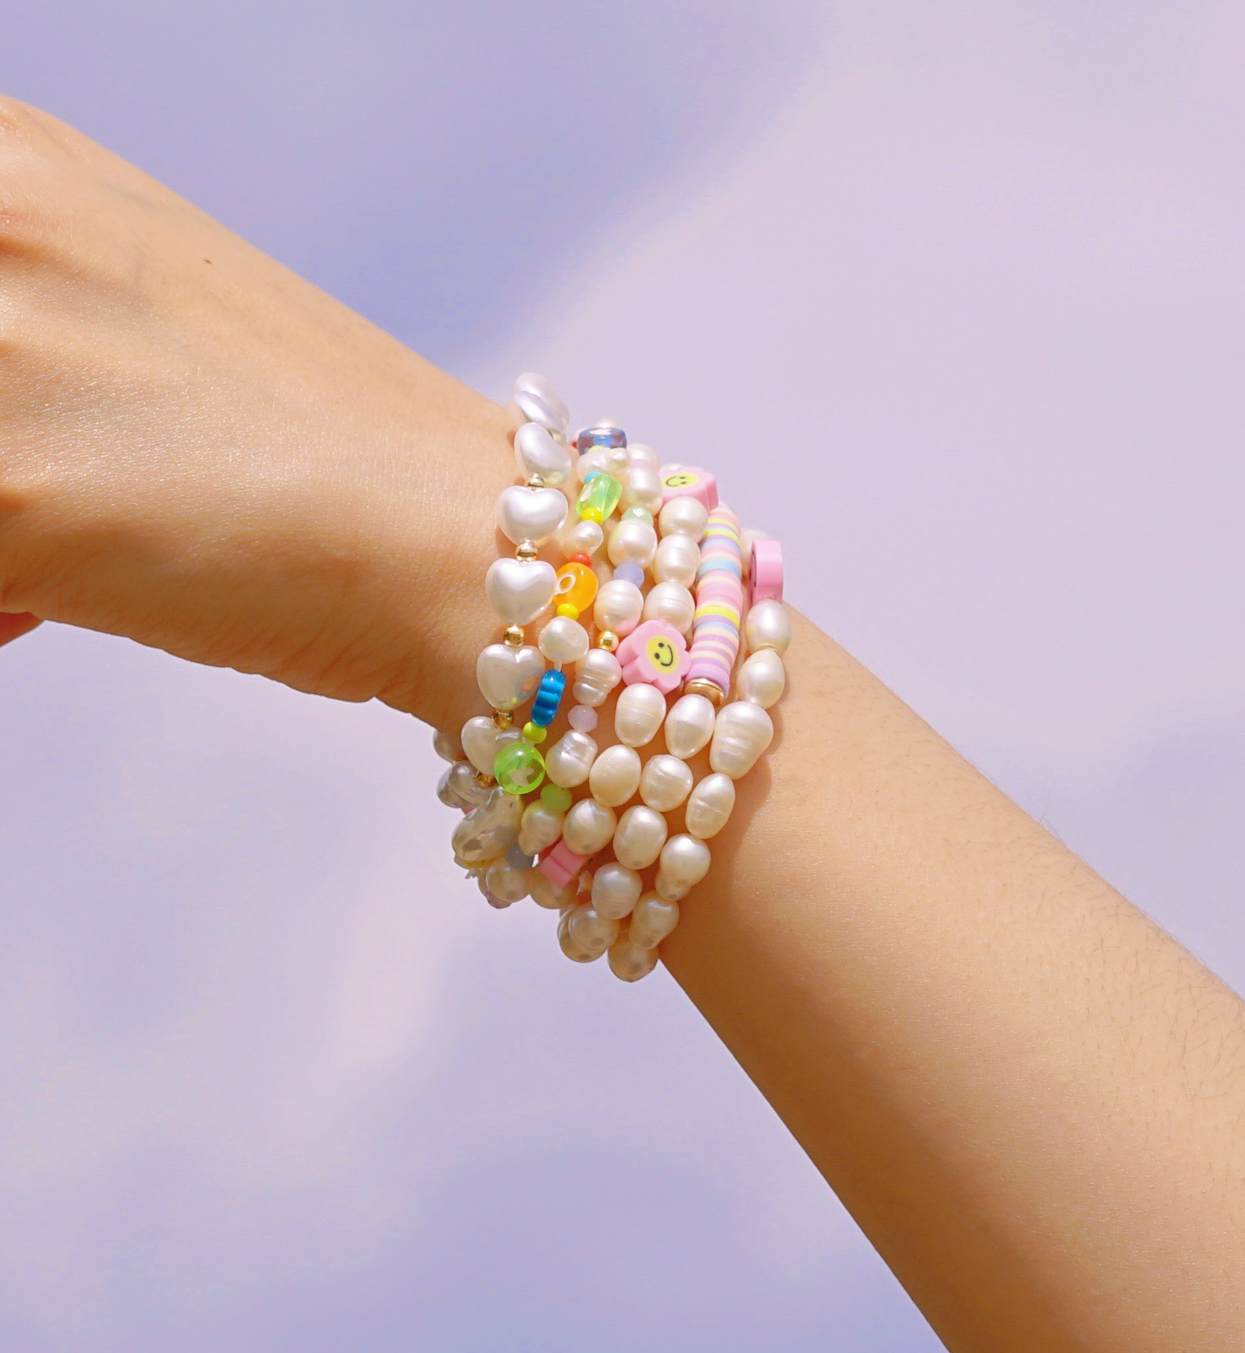 Pink Flower Smiley Pearl Armband